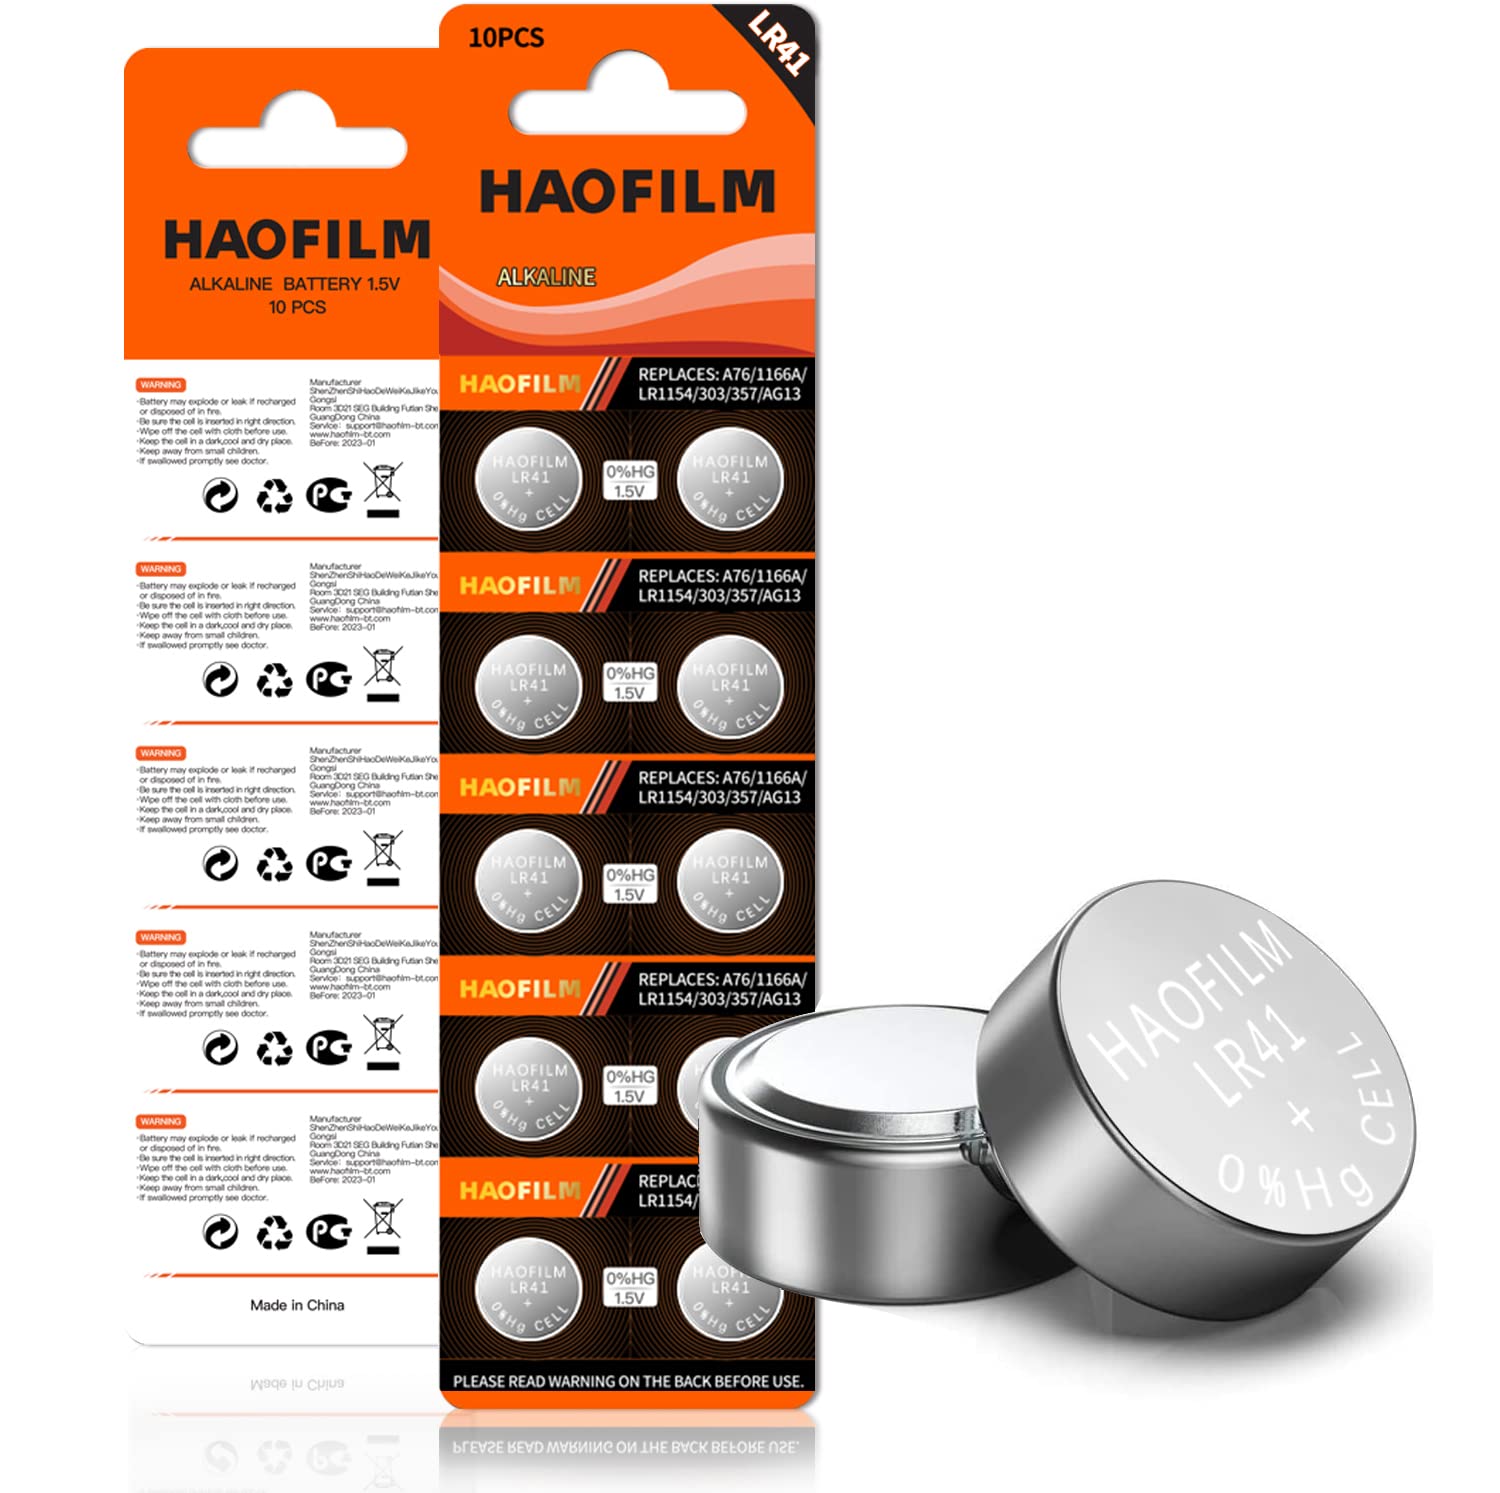 HAOFILM LR41 AG3 392 384 192 Advanced Alkaline Battery, 1.5V Round Coin Cell Battery (Pack of 10)